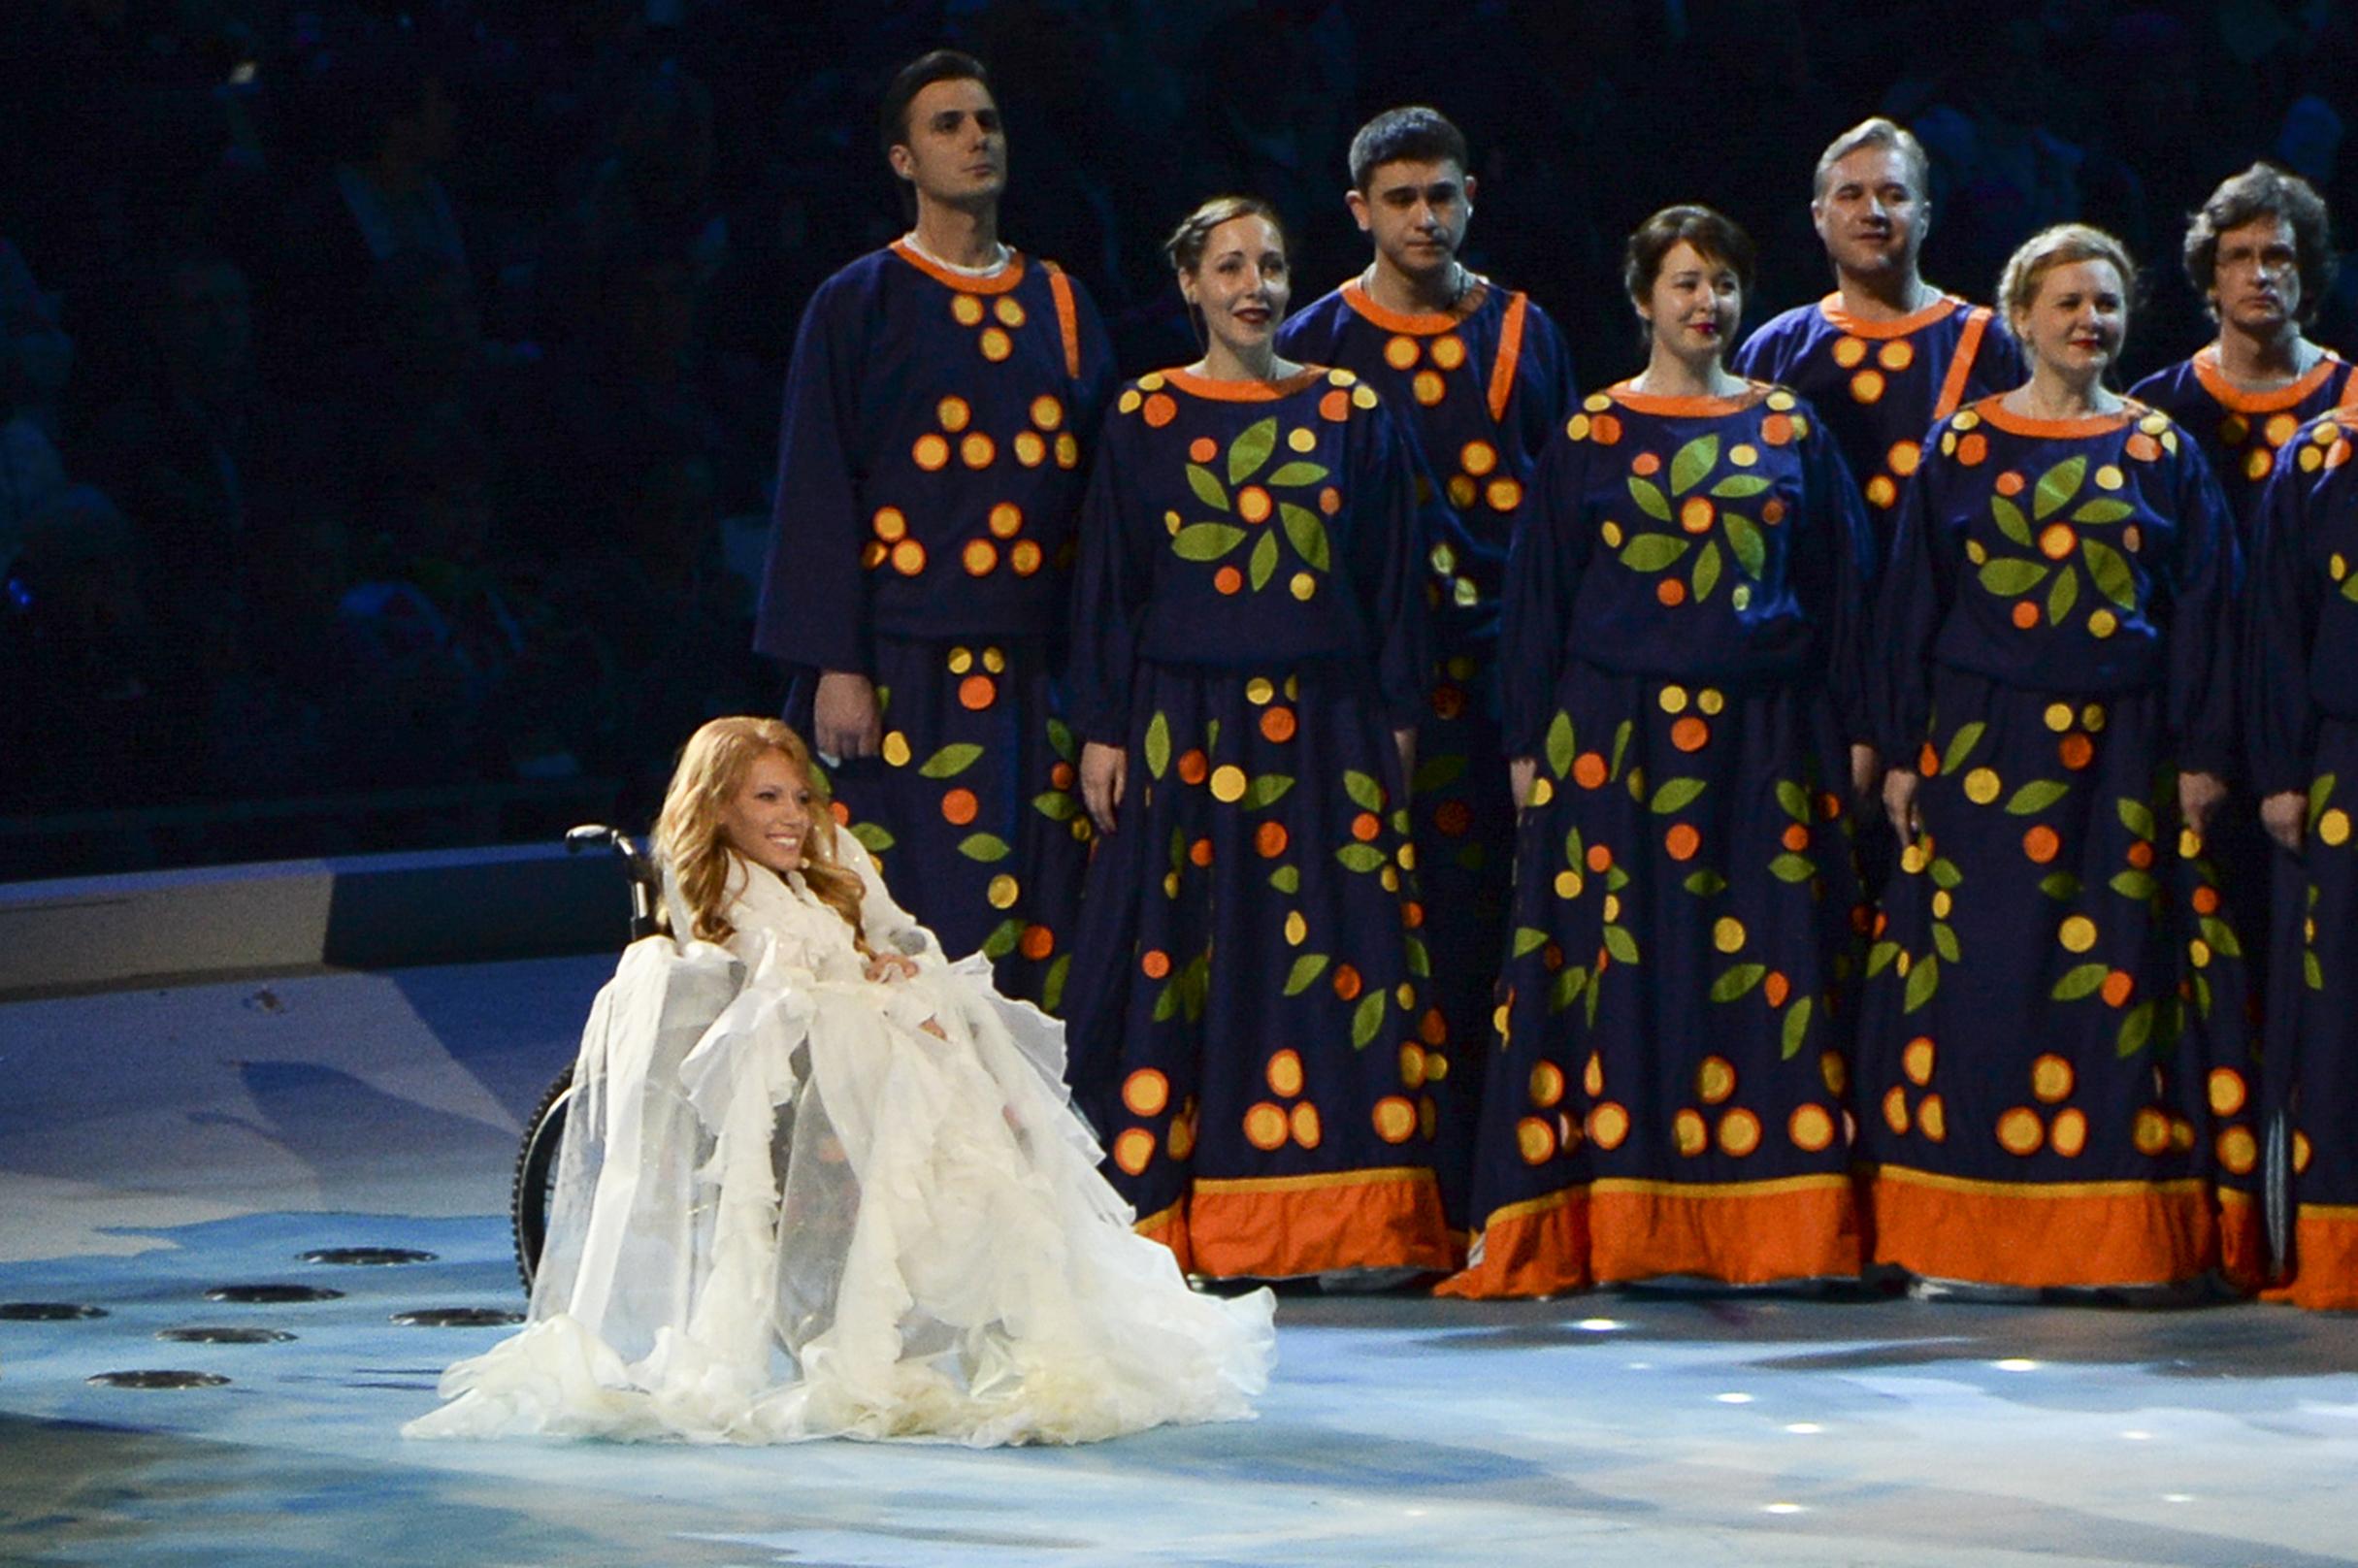 Yulia Samoylova sings during the opening ceremony of the 2014 Paralympic Games